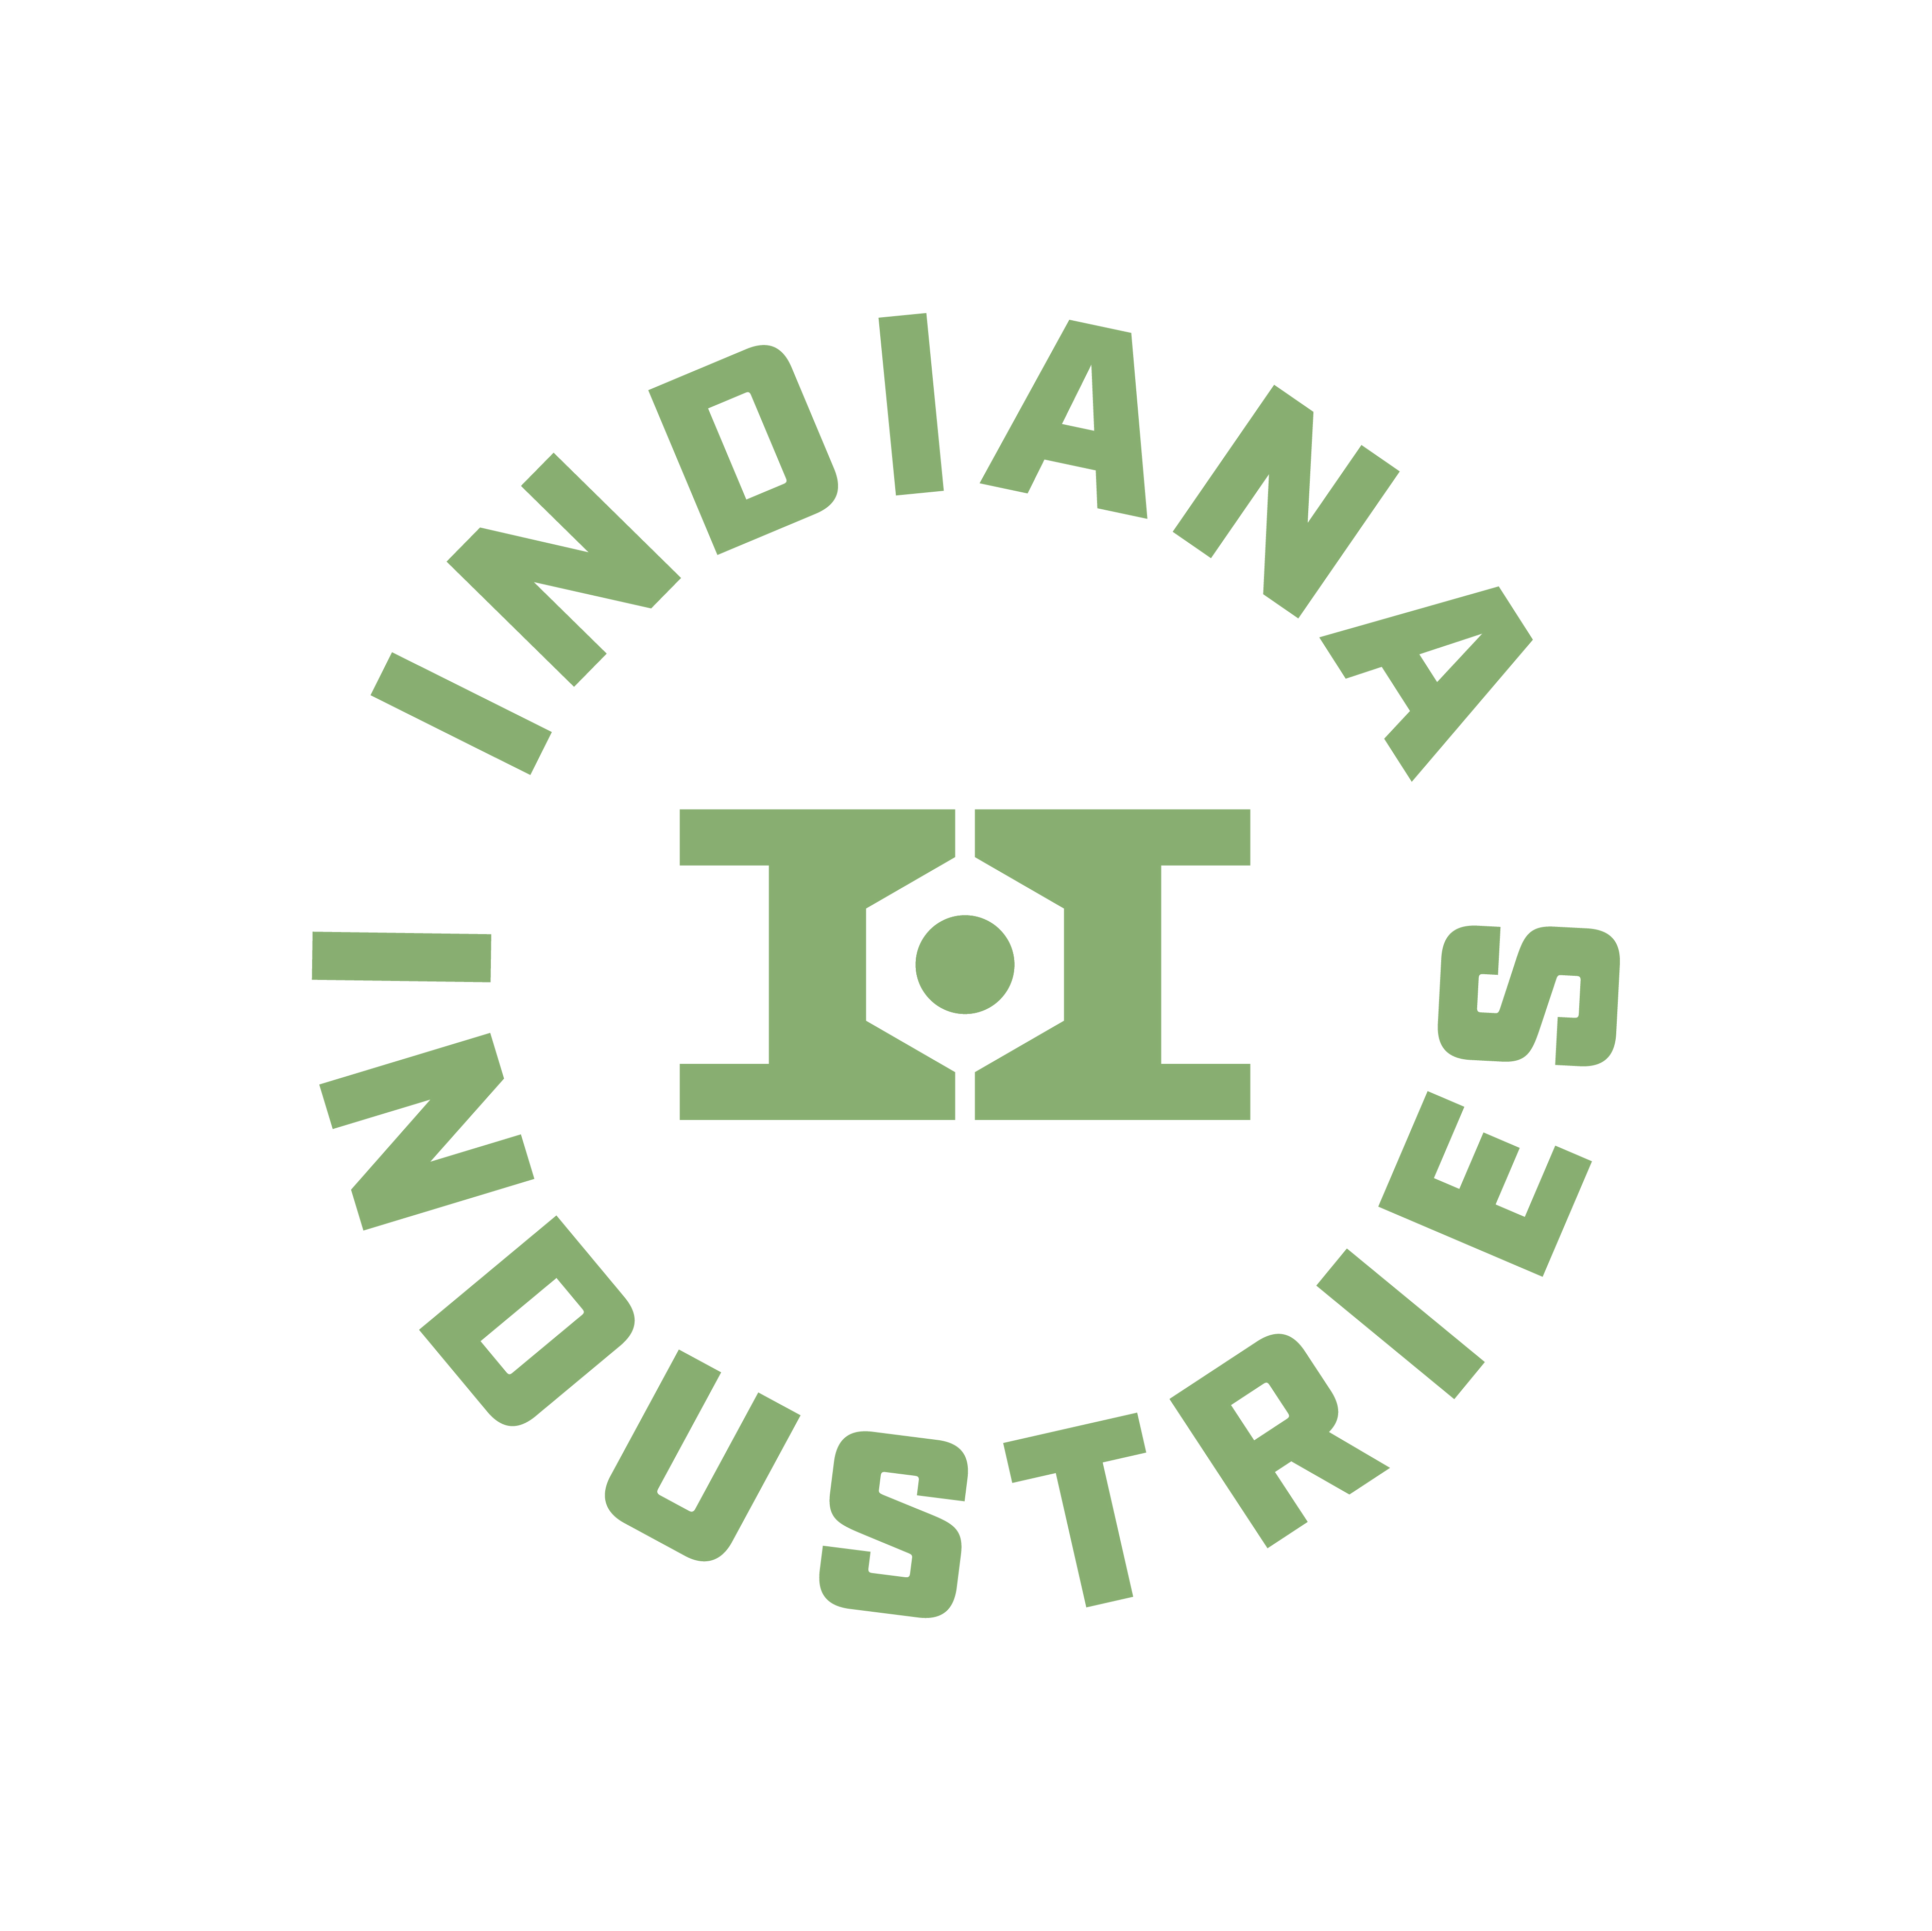 Indiana Industries logo design by logo designer Abby Ryan Design for your inspiration and for the worlds largest logo competition